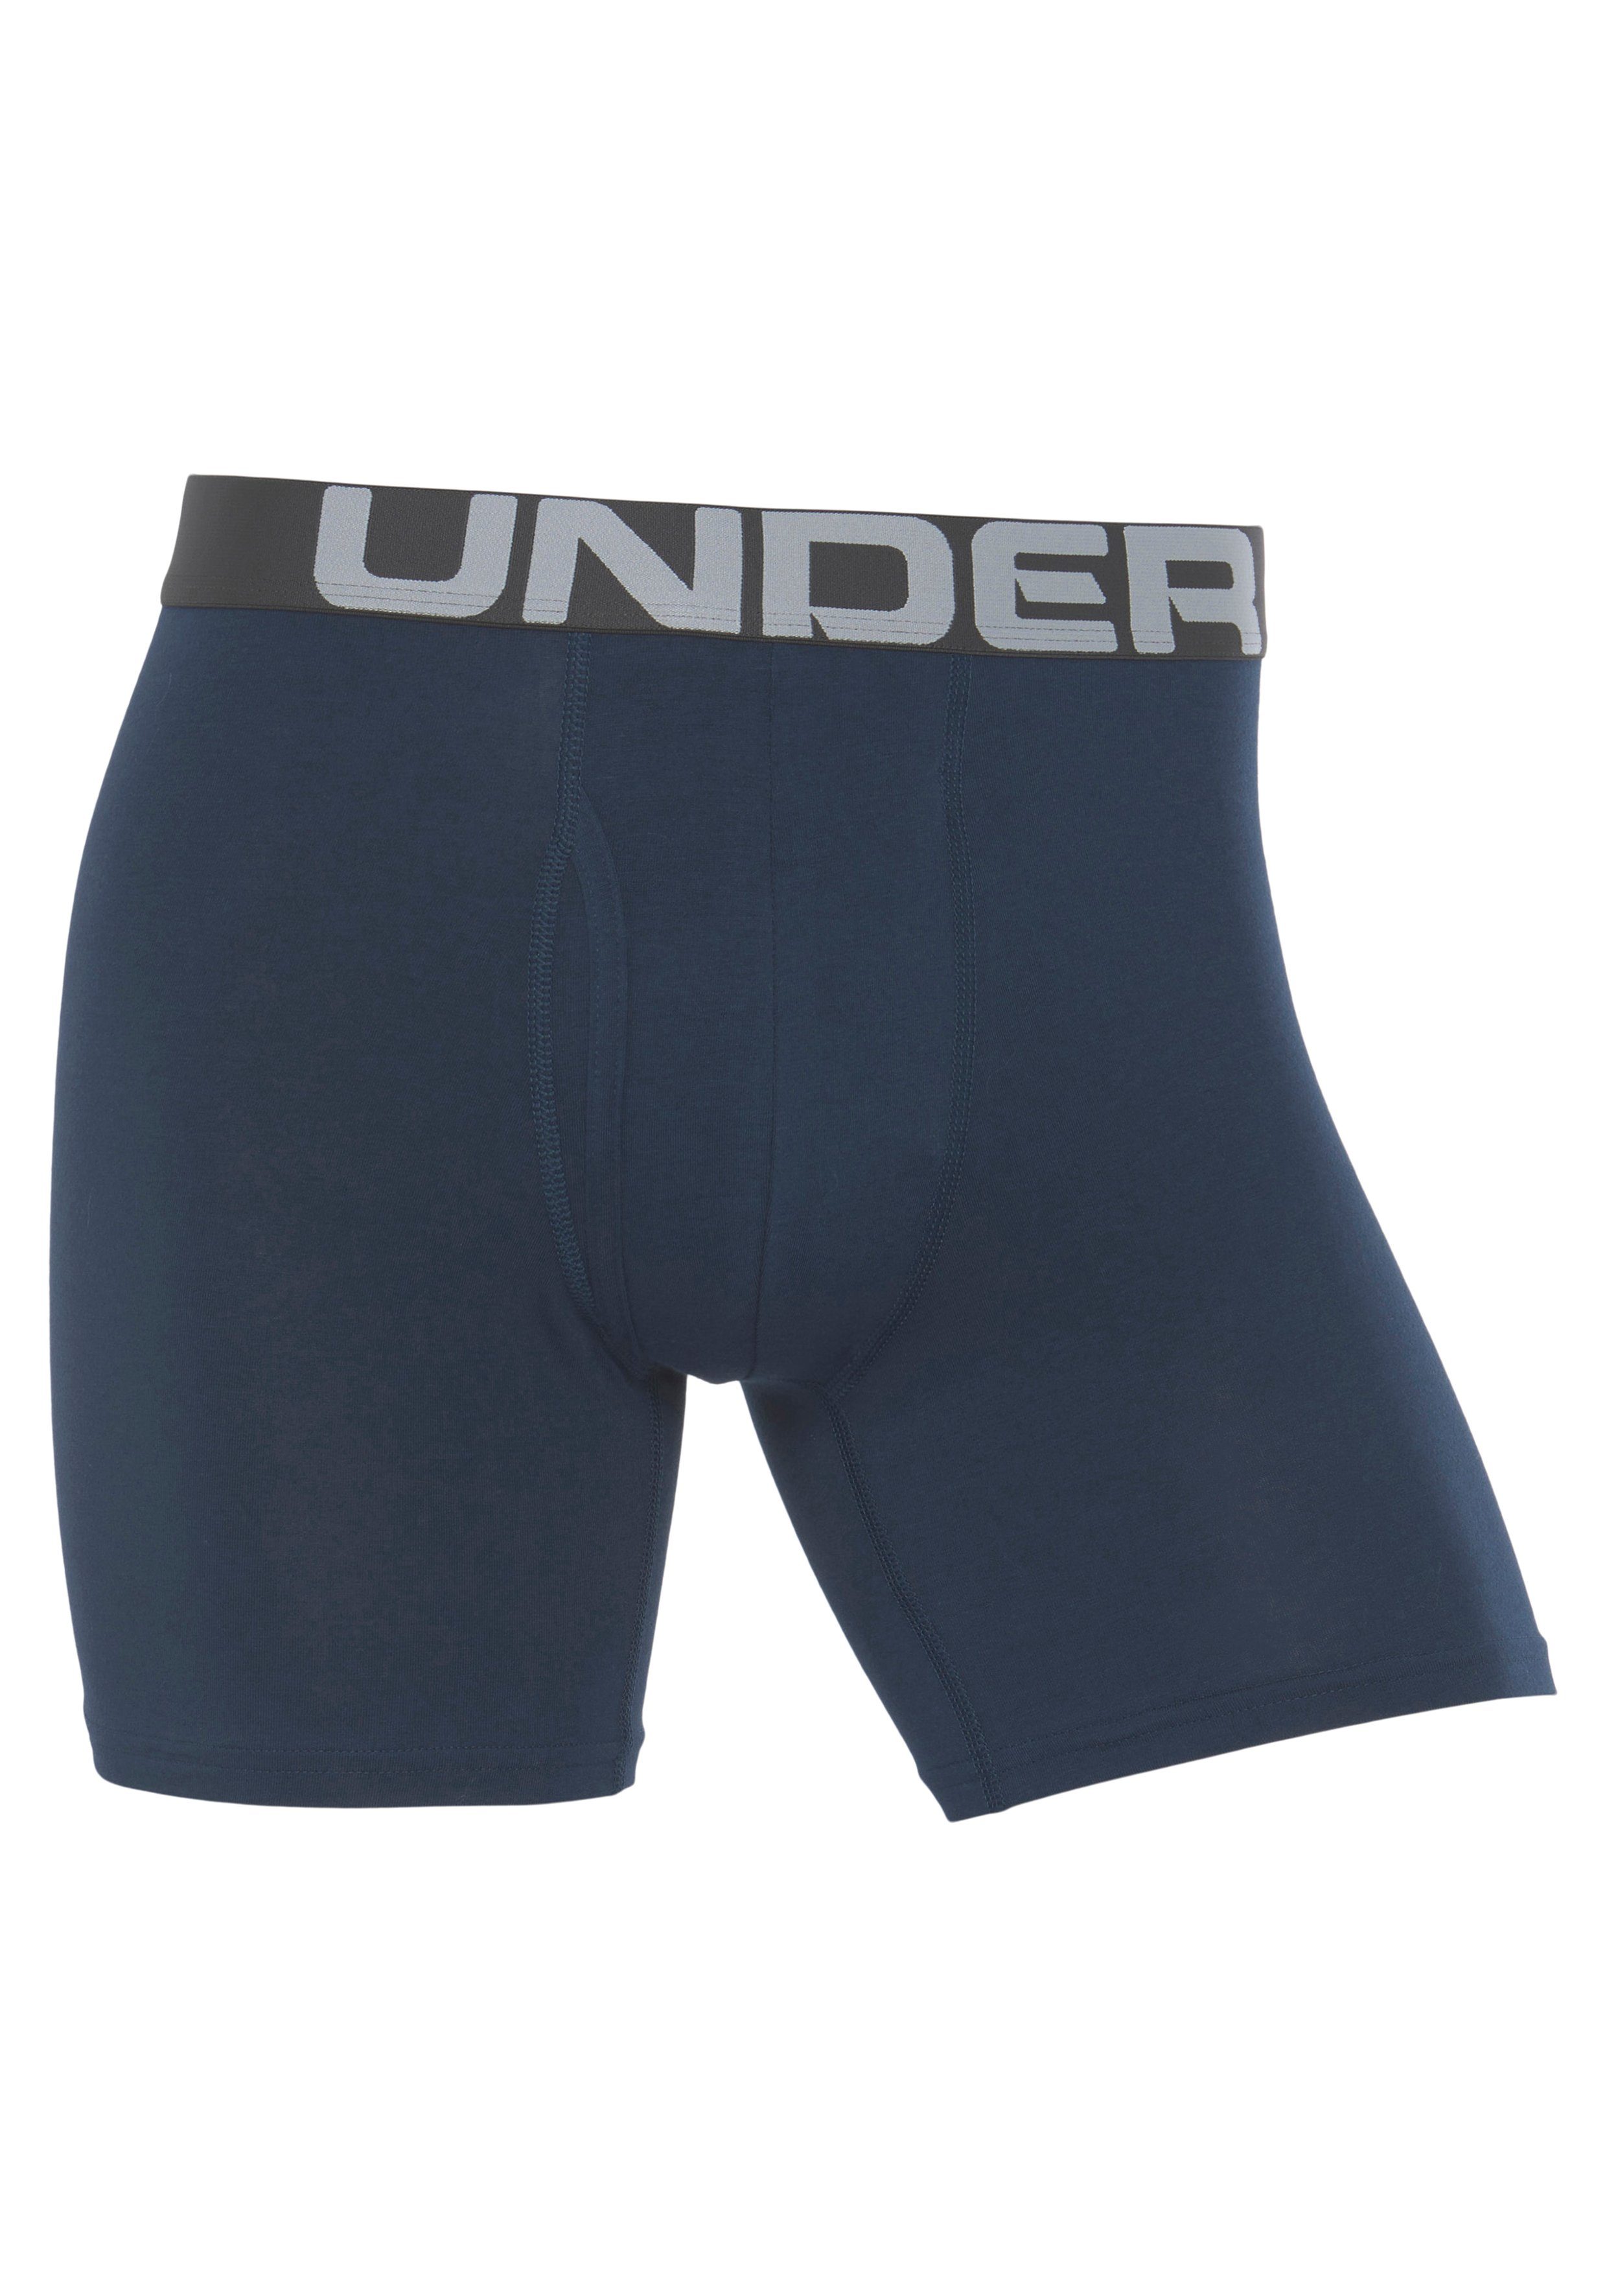 Under Armour® Boxershorts CHARGED 3-St., PACK 6 schwarz-blau-grau in 3er-Pack) (Packung, COTTON 1